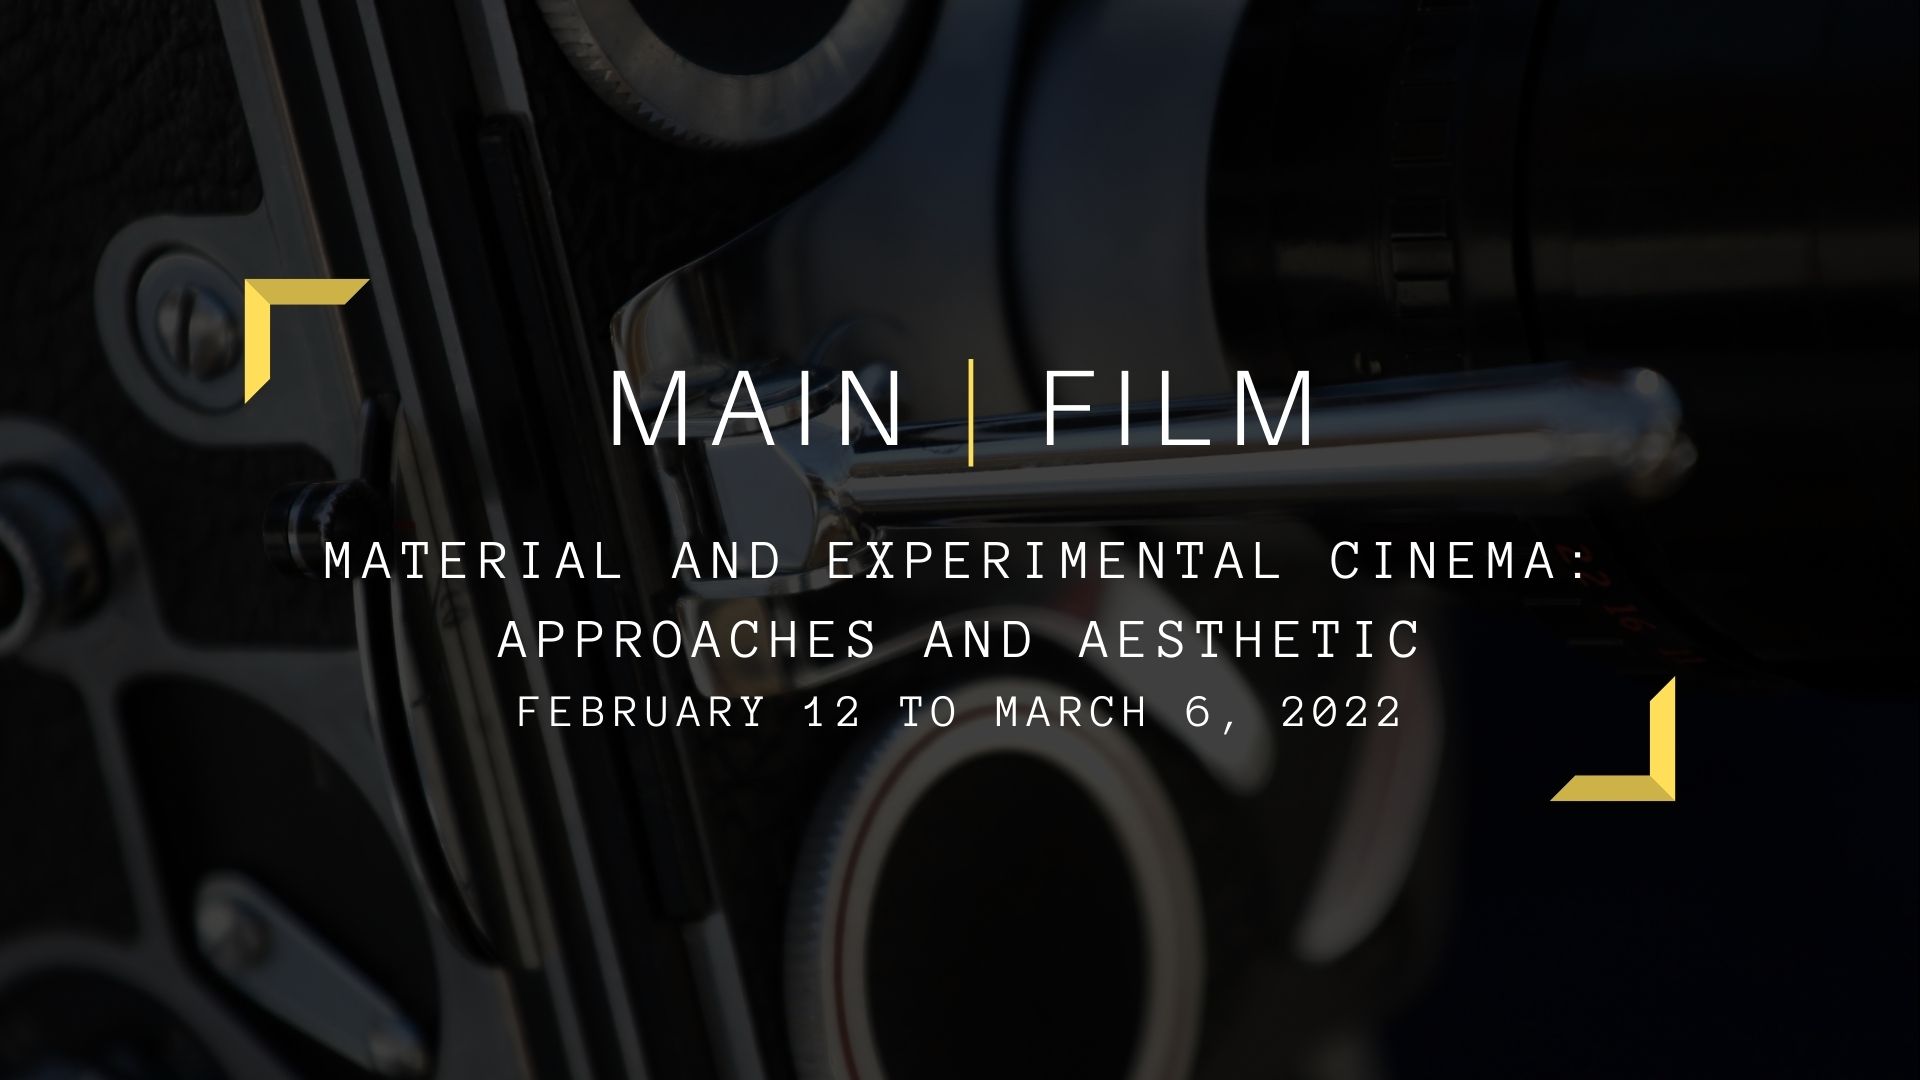 Material and Experimental Cinema: Approaches and Aesthetic | In-person